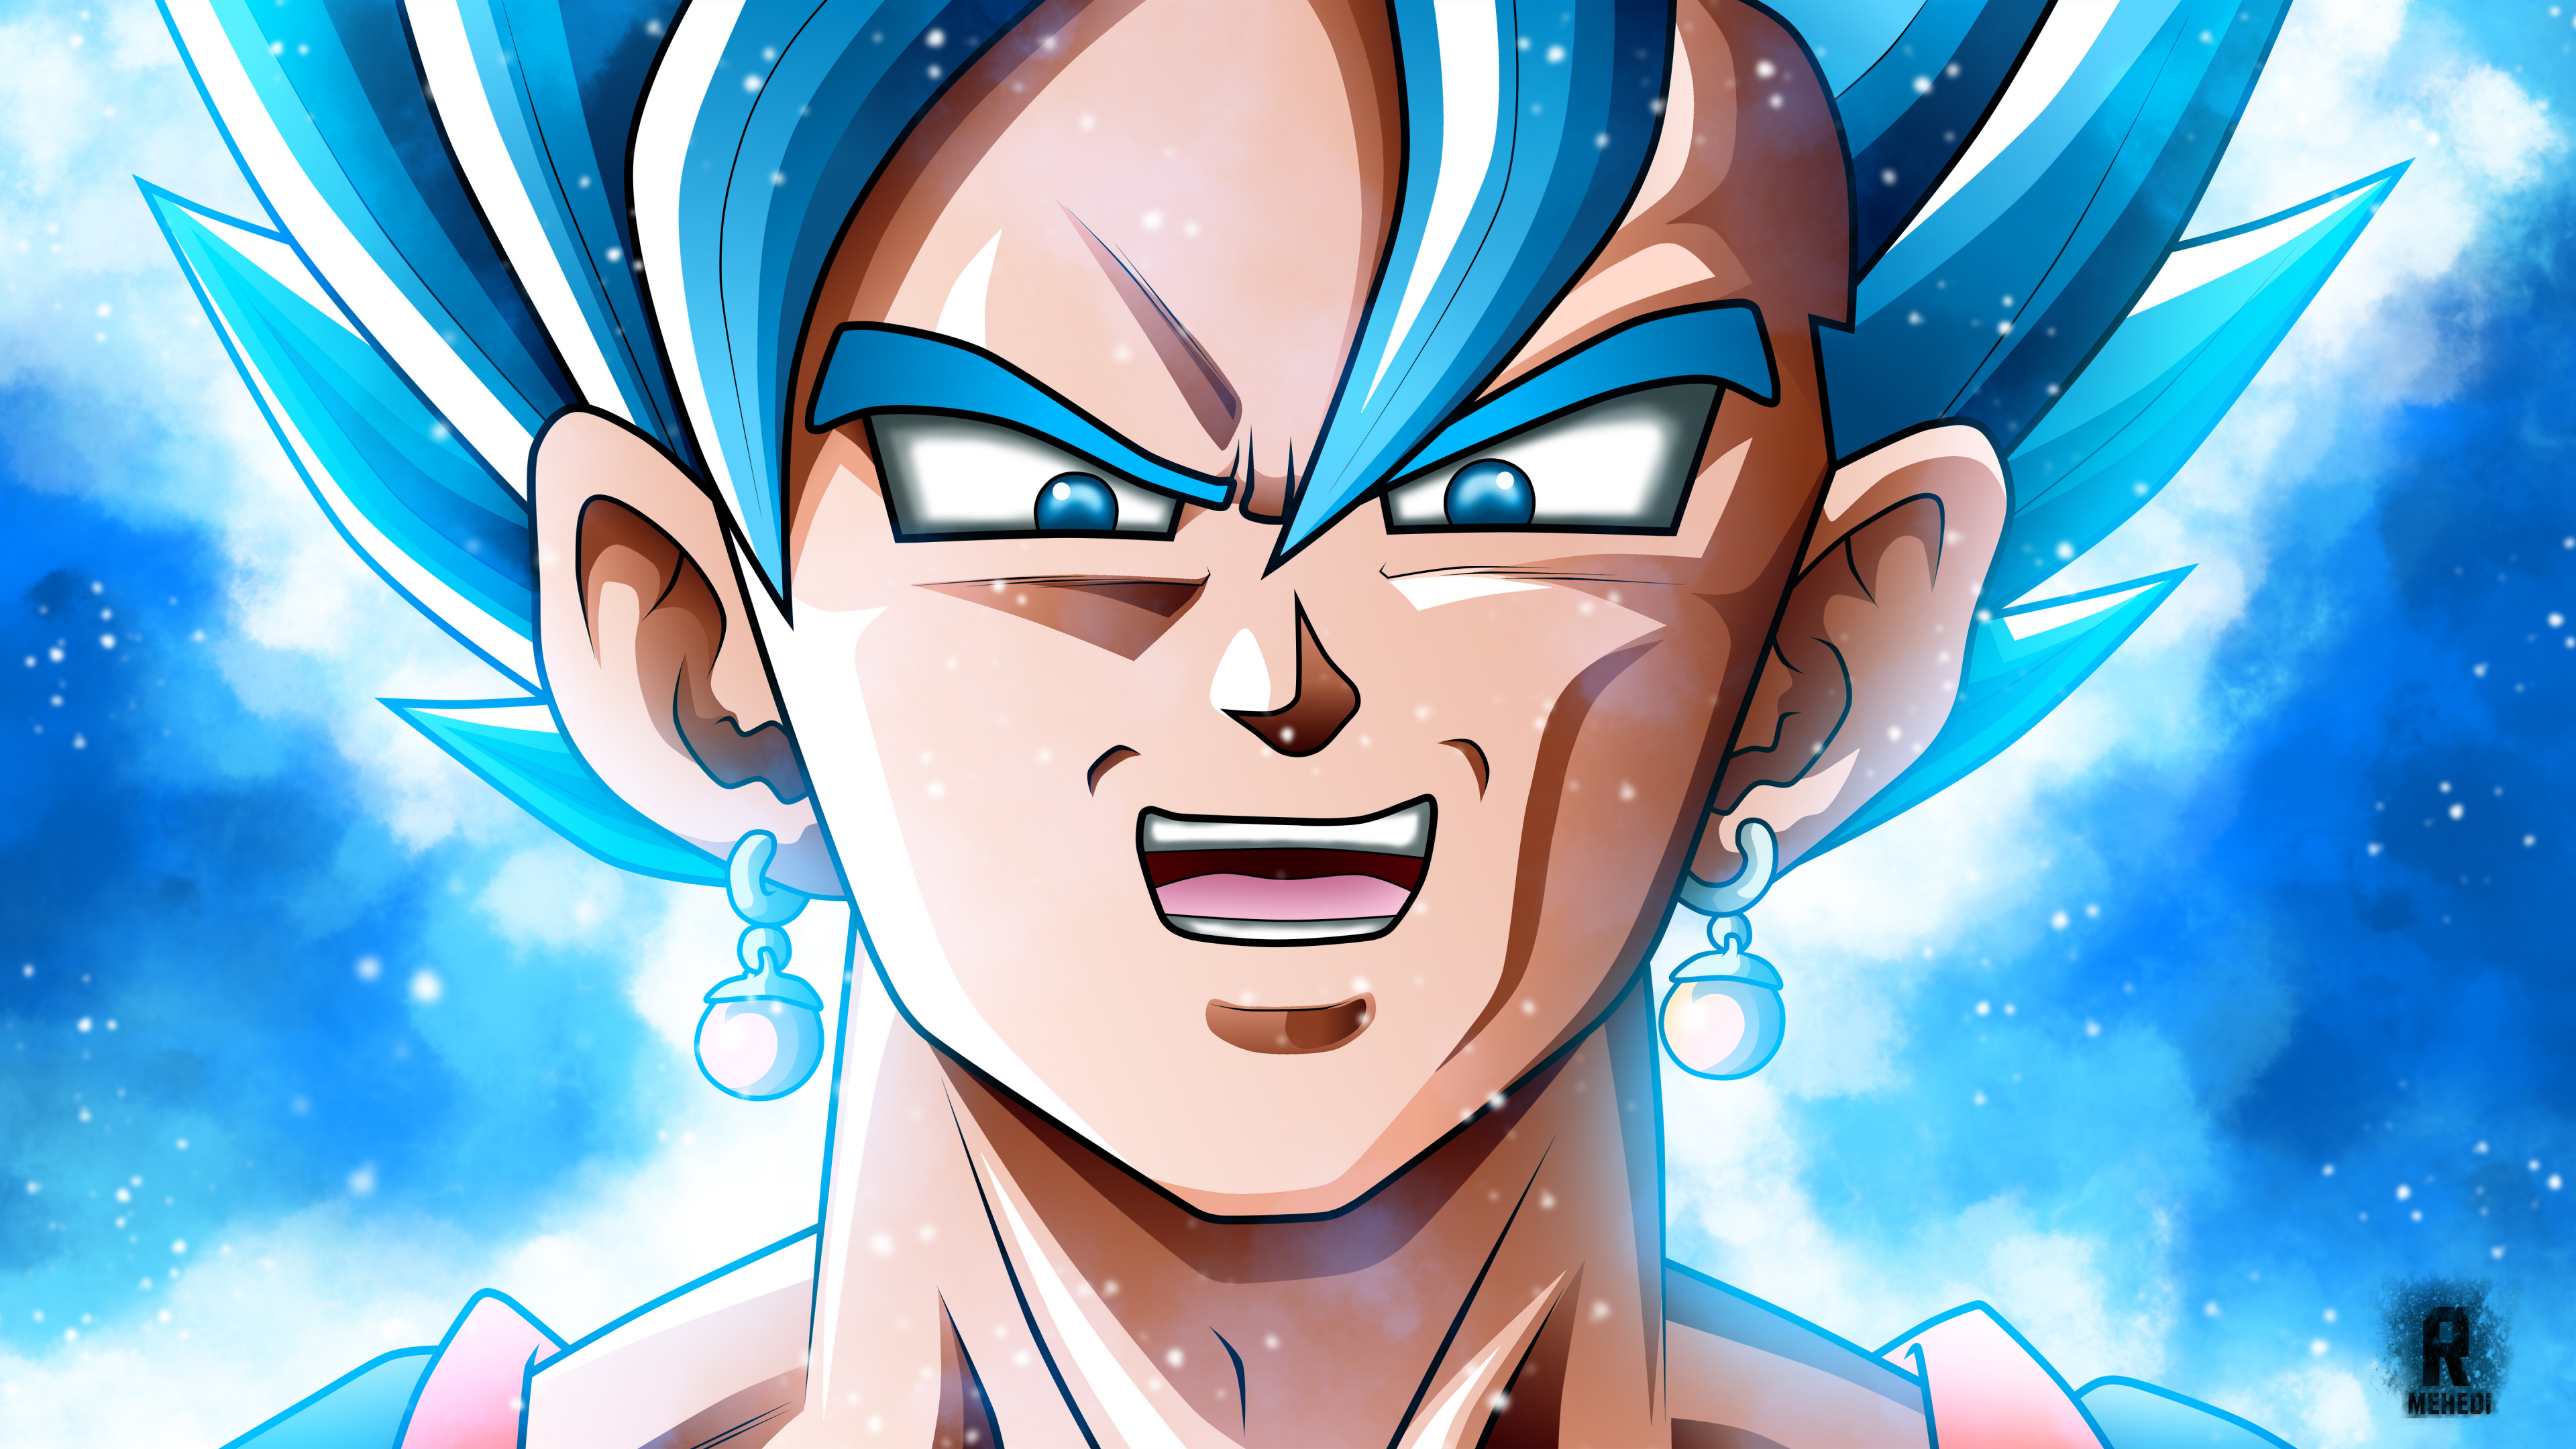 Dragon Ball 4K Ultra HD Wallpapers, HD Dragon Ball 3840x2160 Backgrounds,  Free Images Download